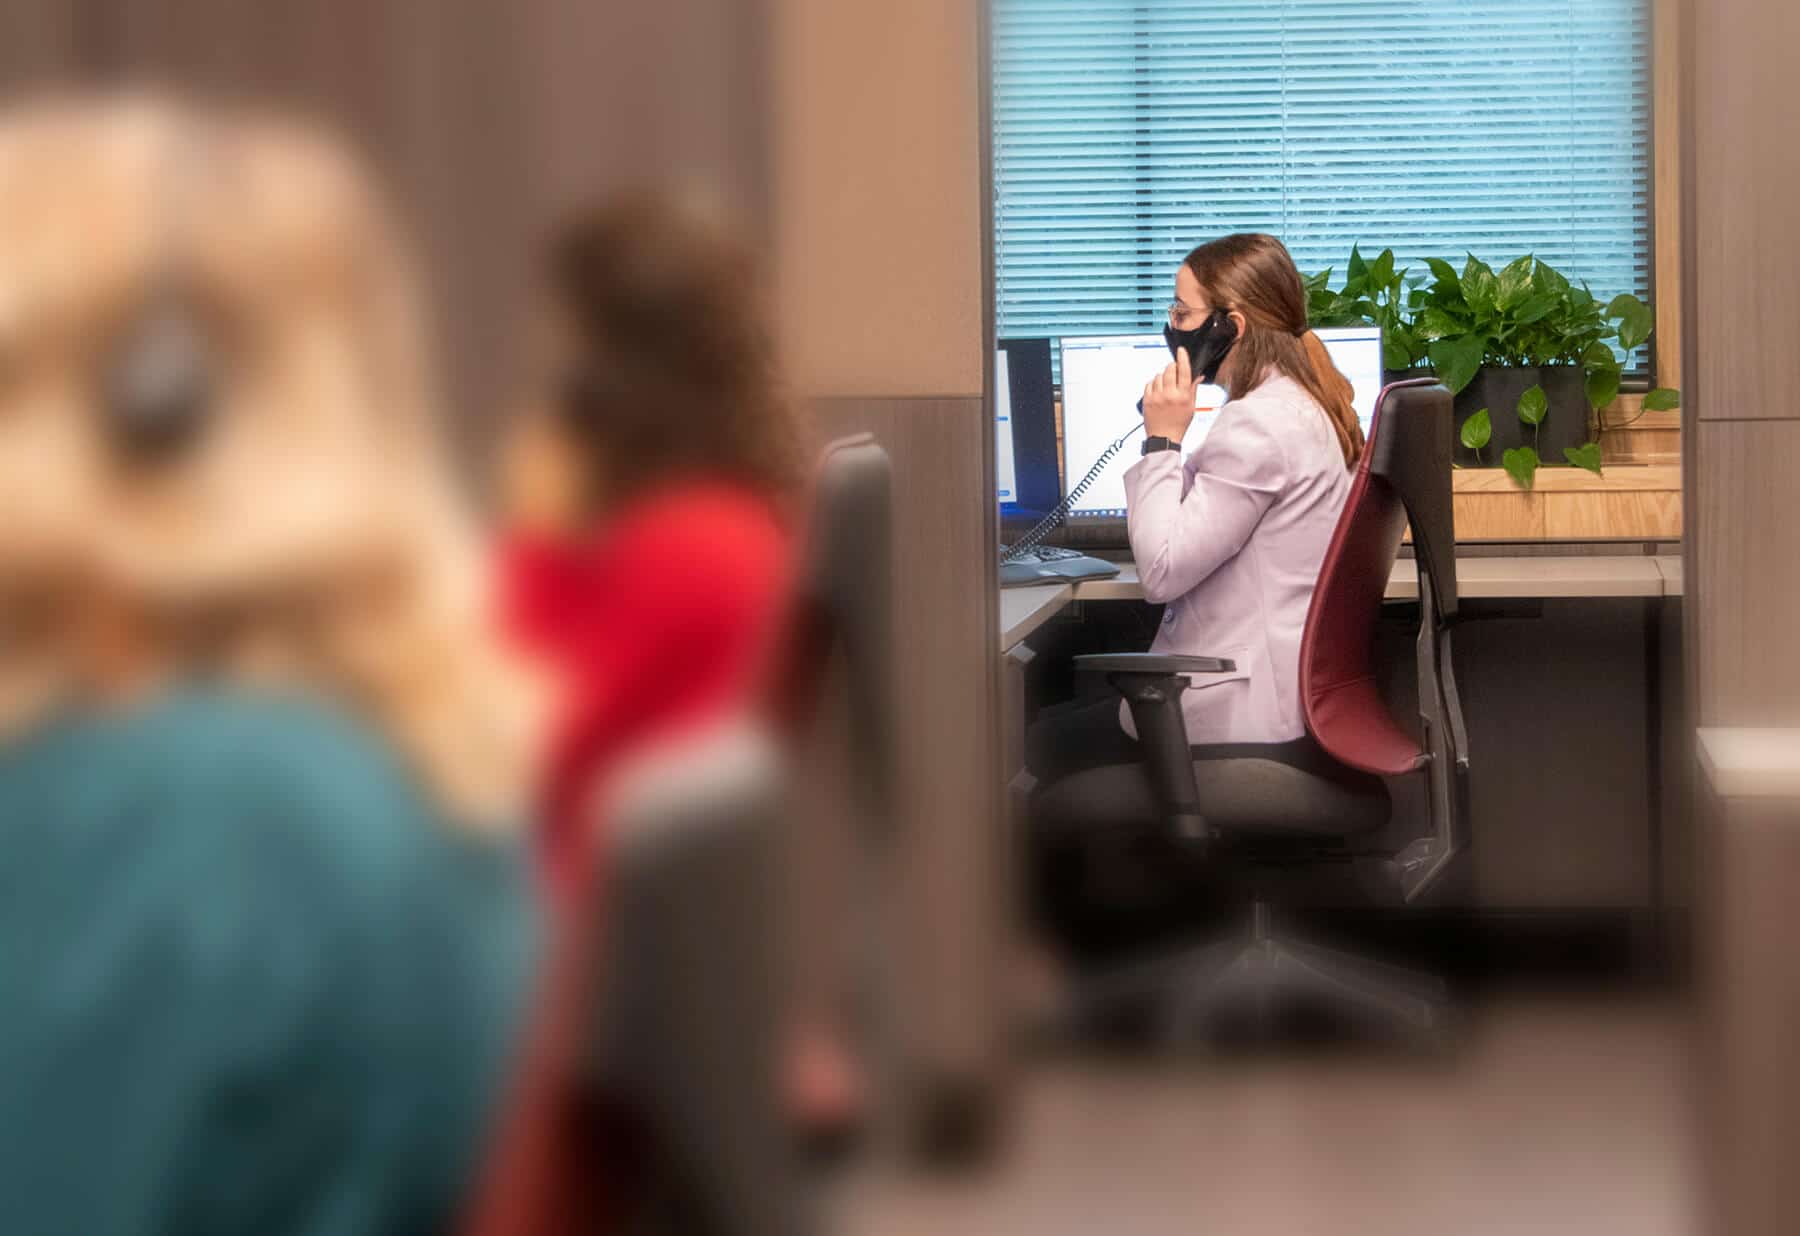 Worker talking on the phone in office.